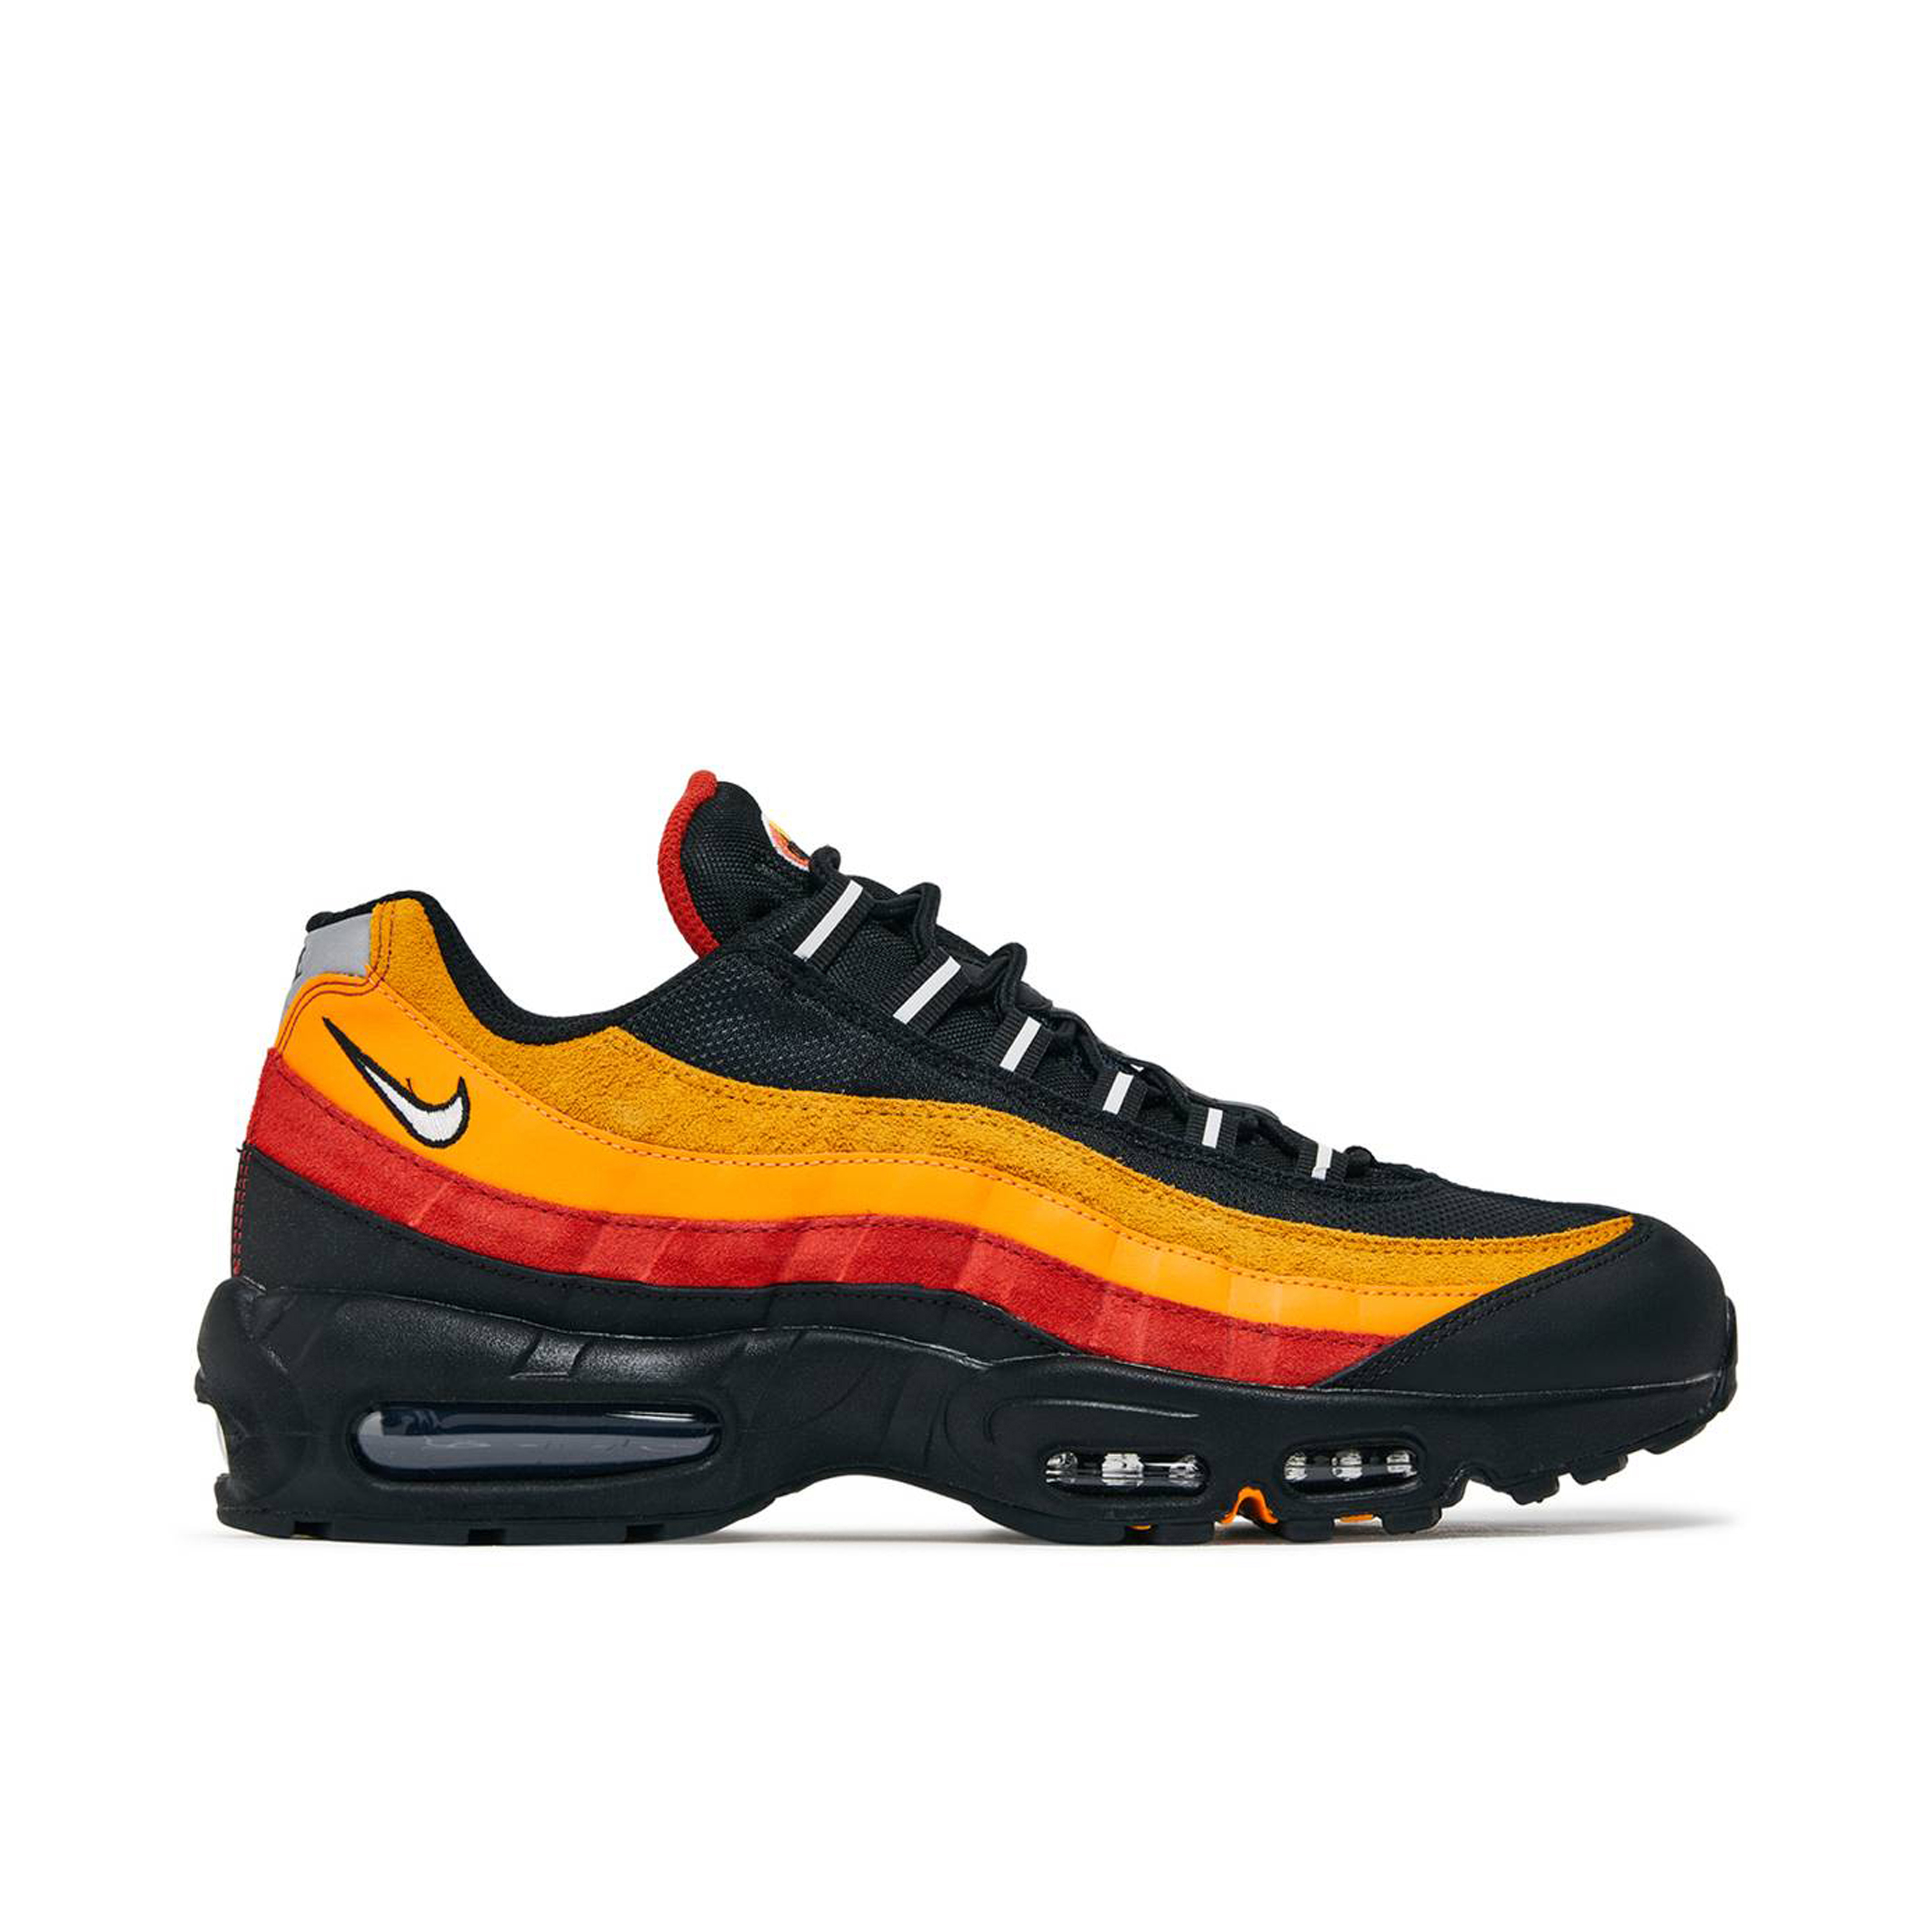 Nike Air Max 95 King of the Mountain | AV7014-600 | Laced